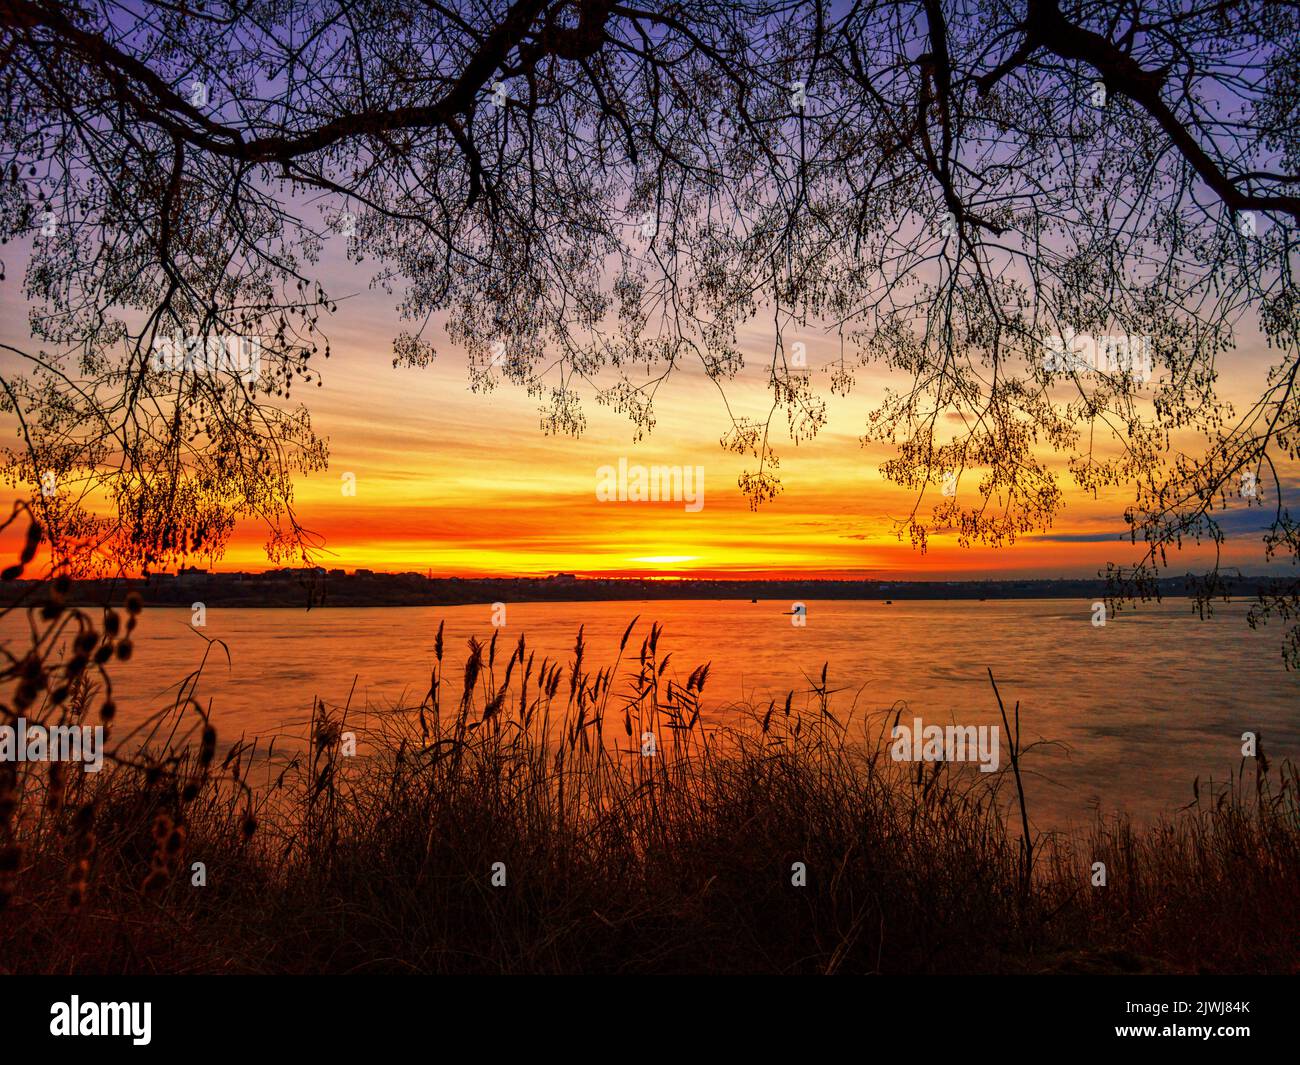 Sunrise on the river, silhouette of tree branches and plants, soft focus Stock Photo